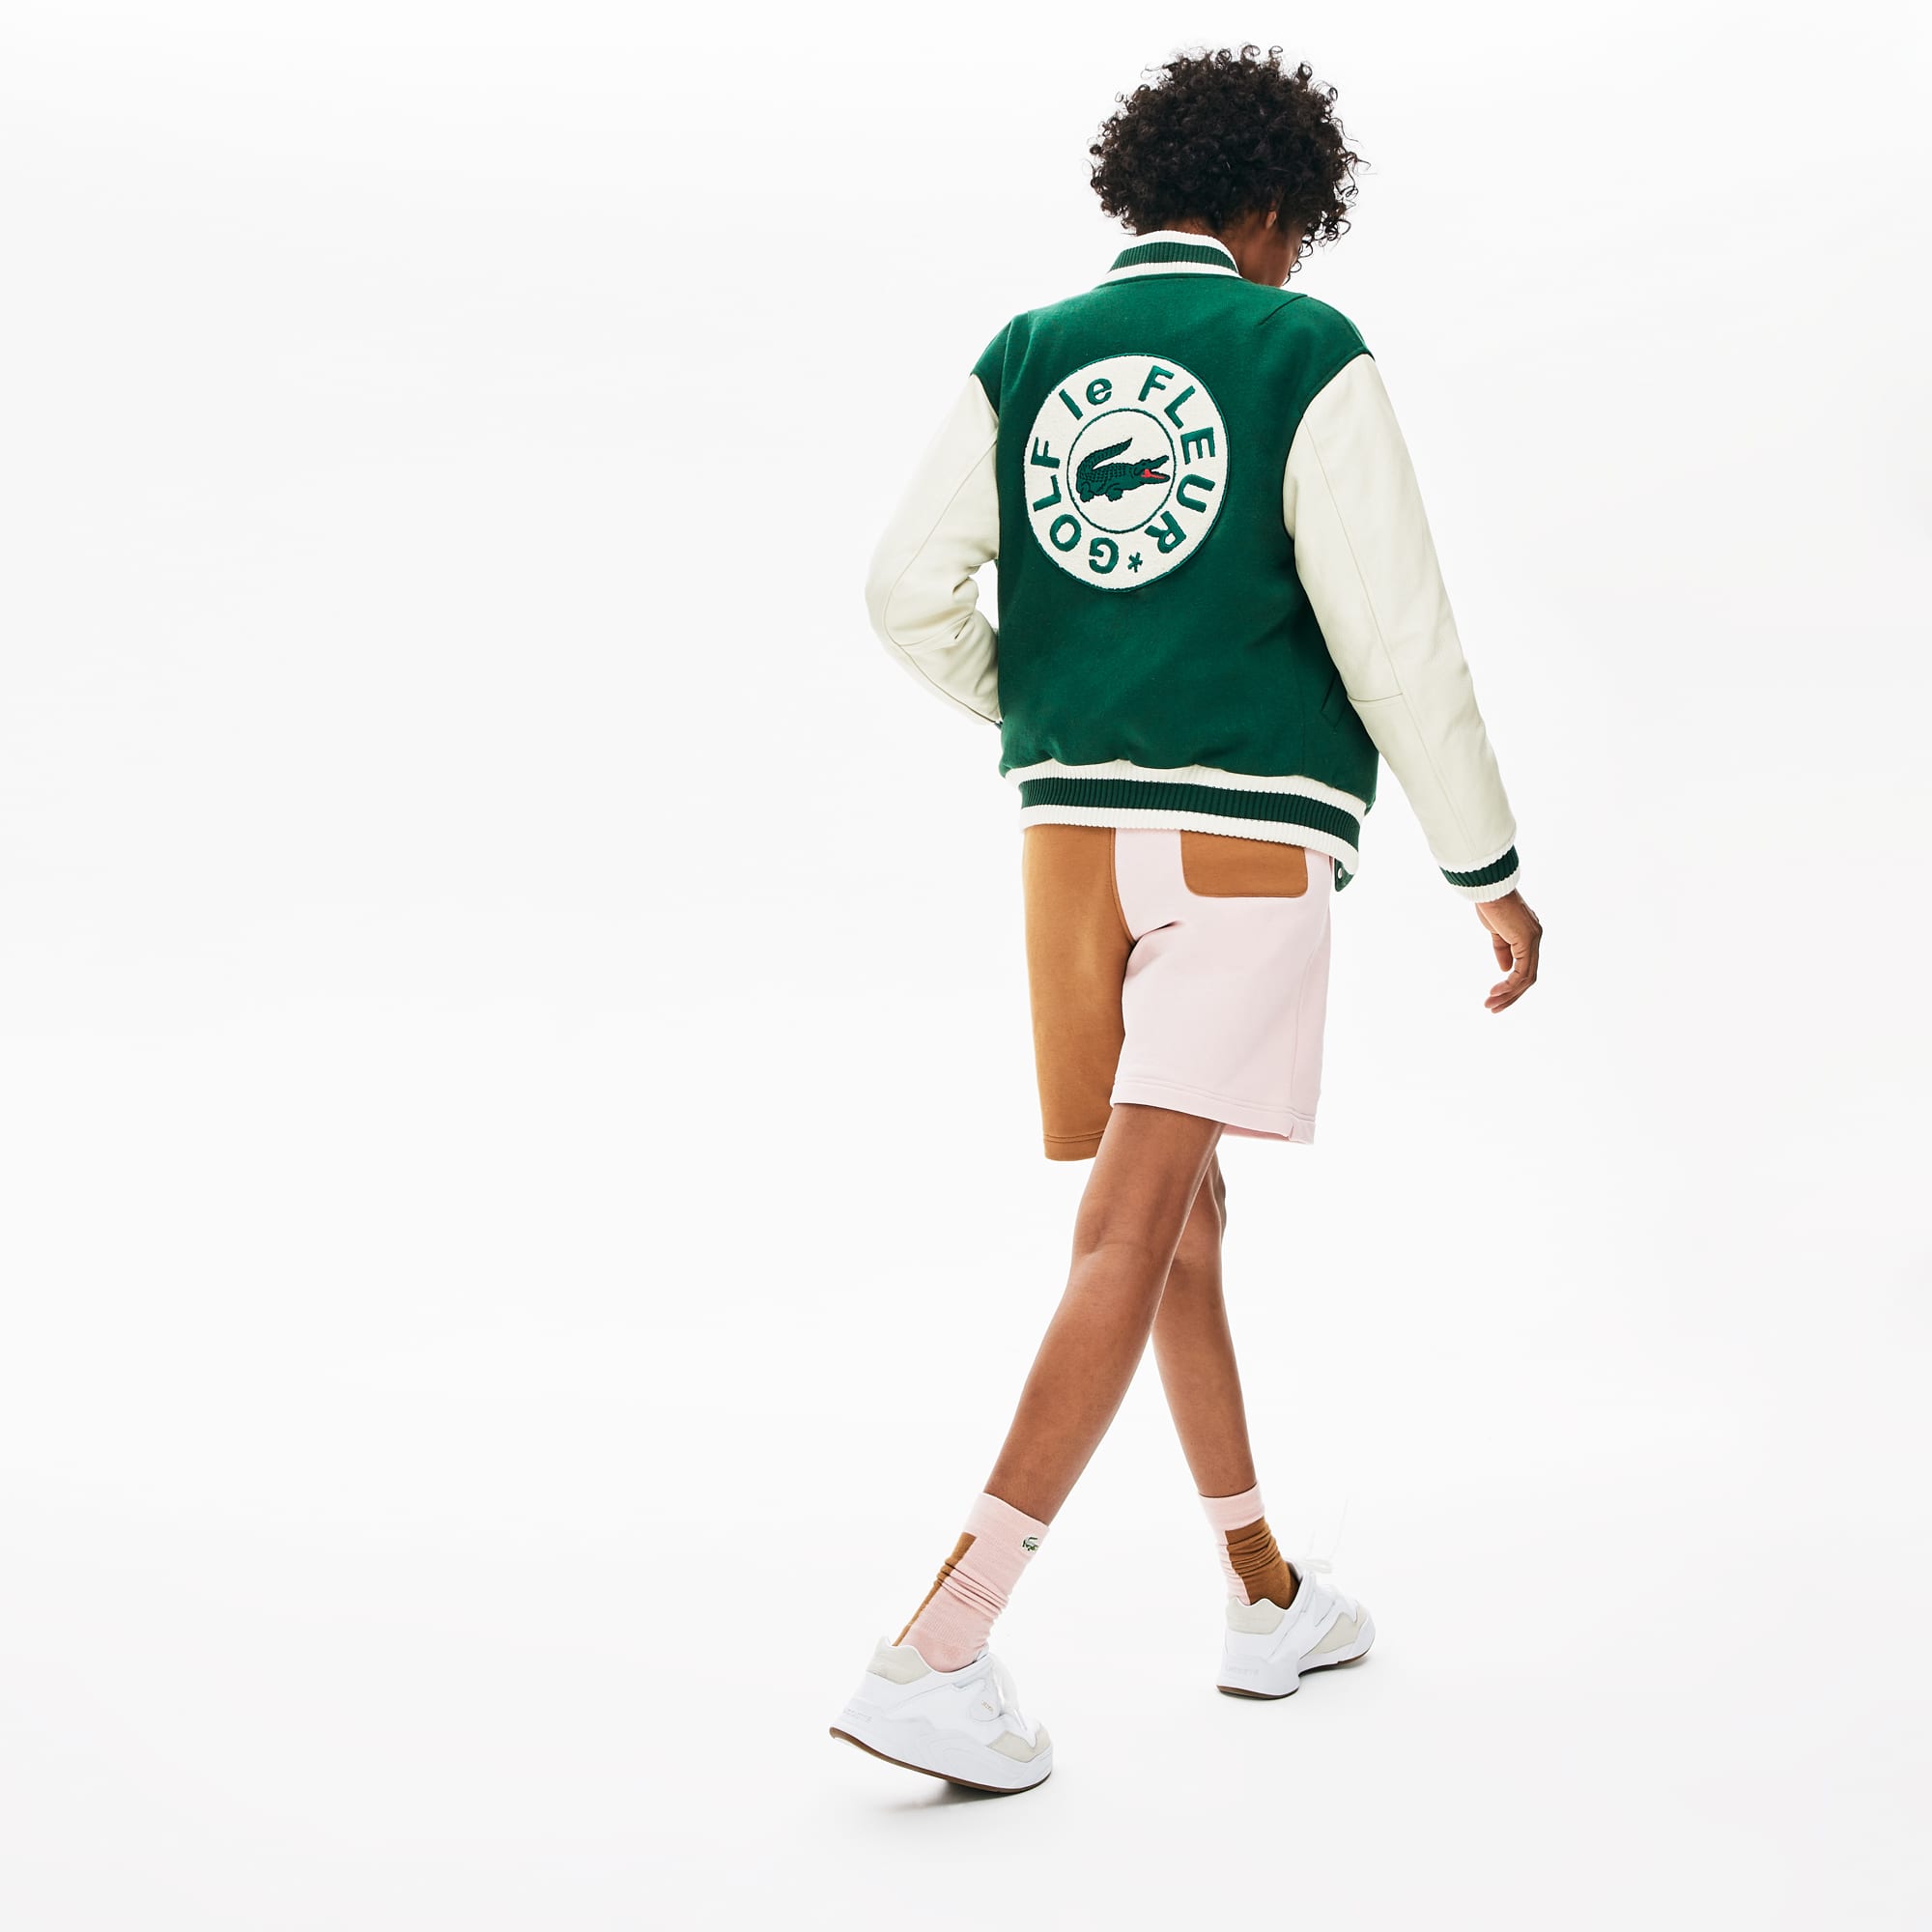 Opdatering Centimeter Milestone Check Out the Full LACOSTE x GOLF le FLEUR* Collection by Tyler, The Creator  - The Source